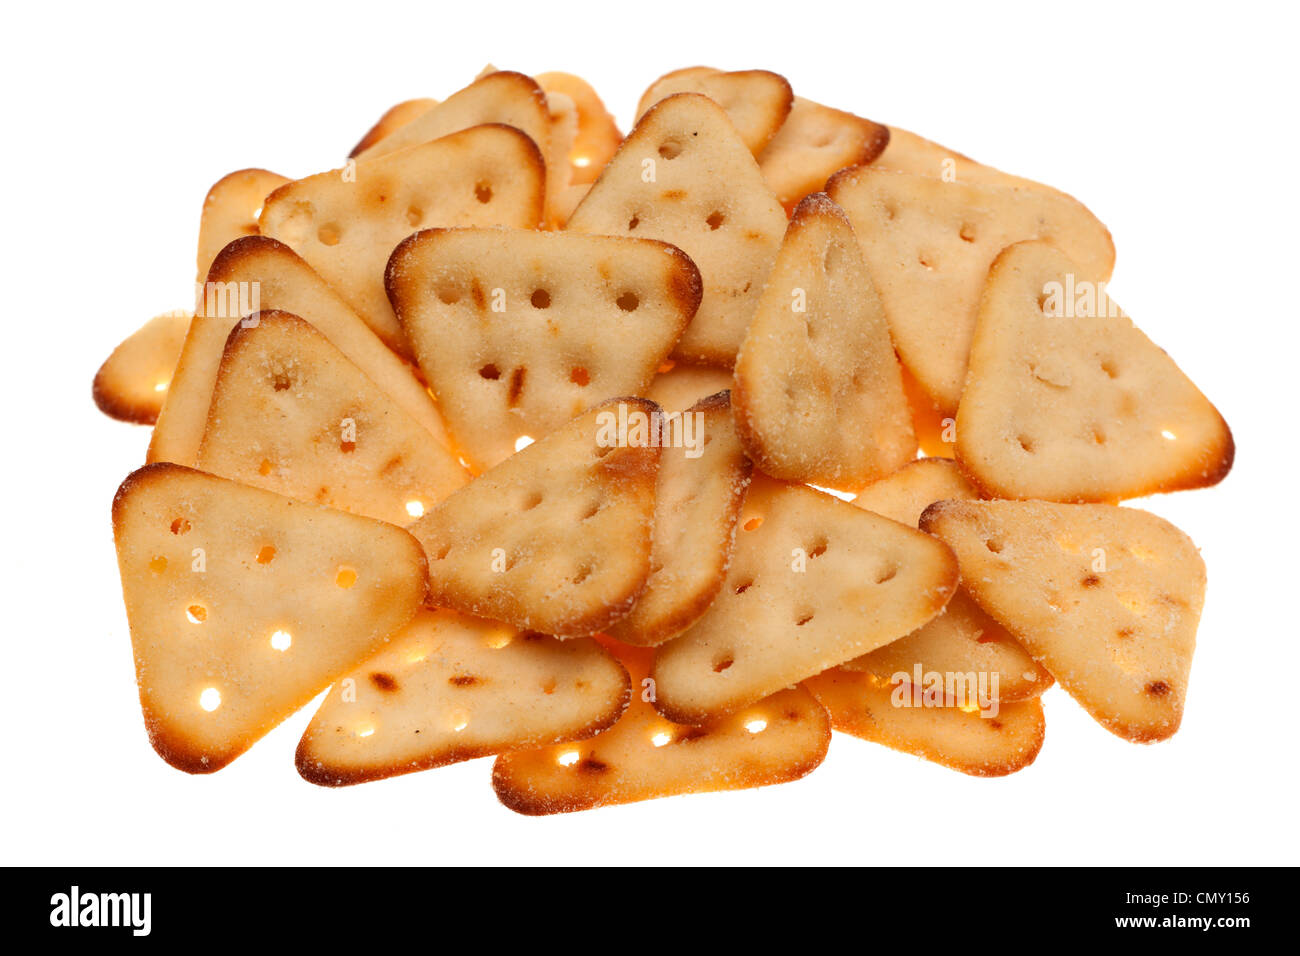 Pile of triangular cheese and onion flavoured biscuits Stock Photo